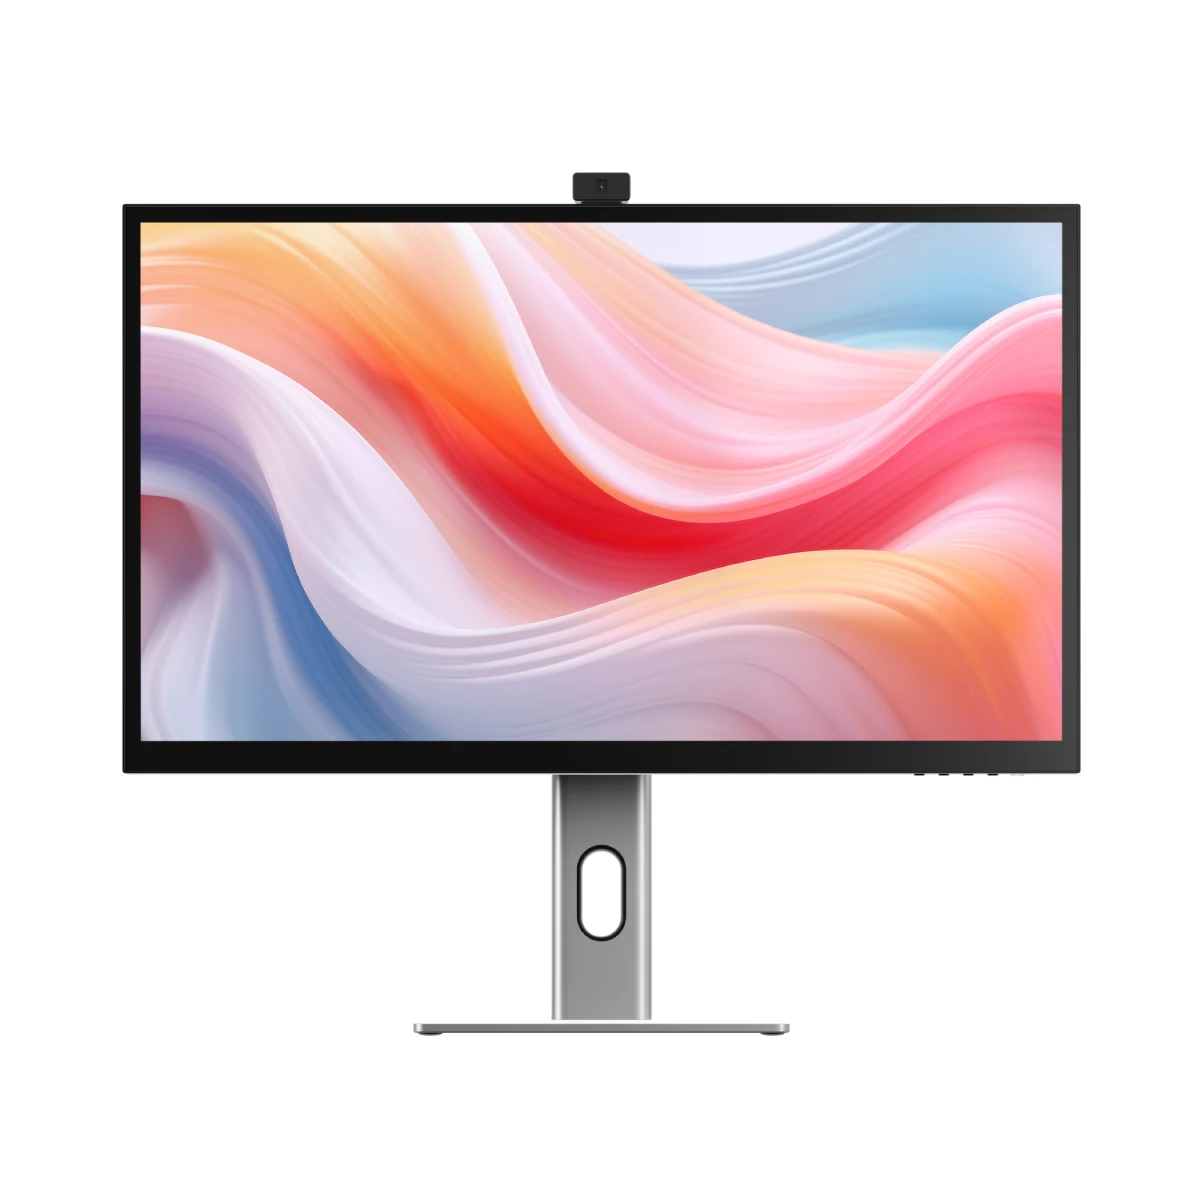 clarity-pro-27-uhd-4k-monitor-with-65w-pd-and-webcam-pack-of-2-thunderbolt-4-blaze-docking-station_2